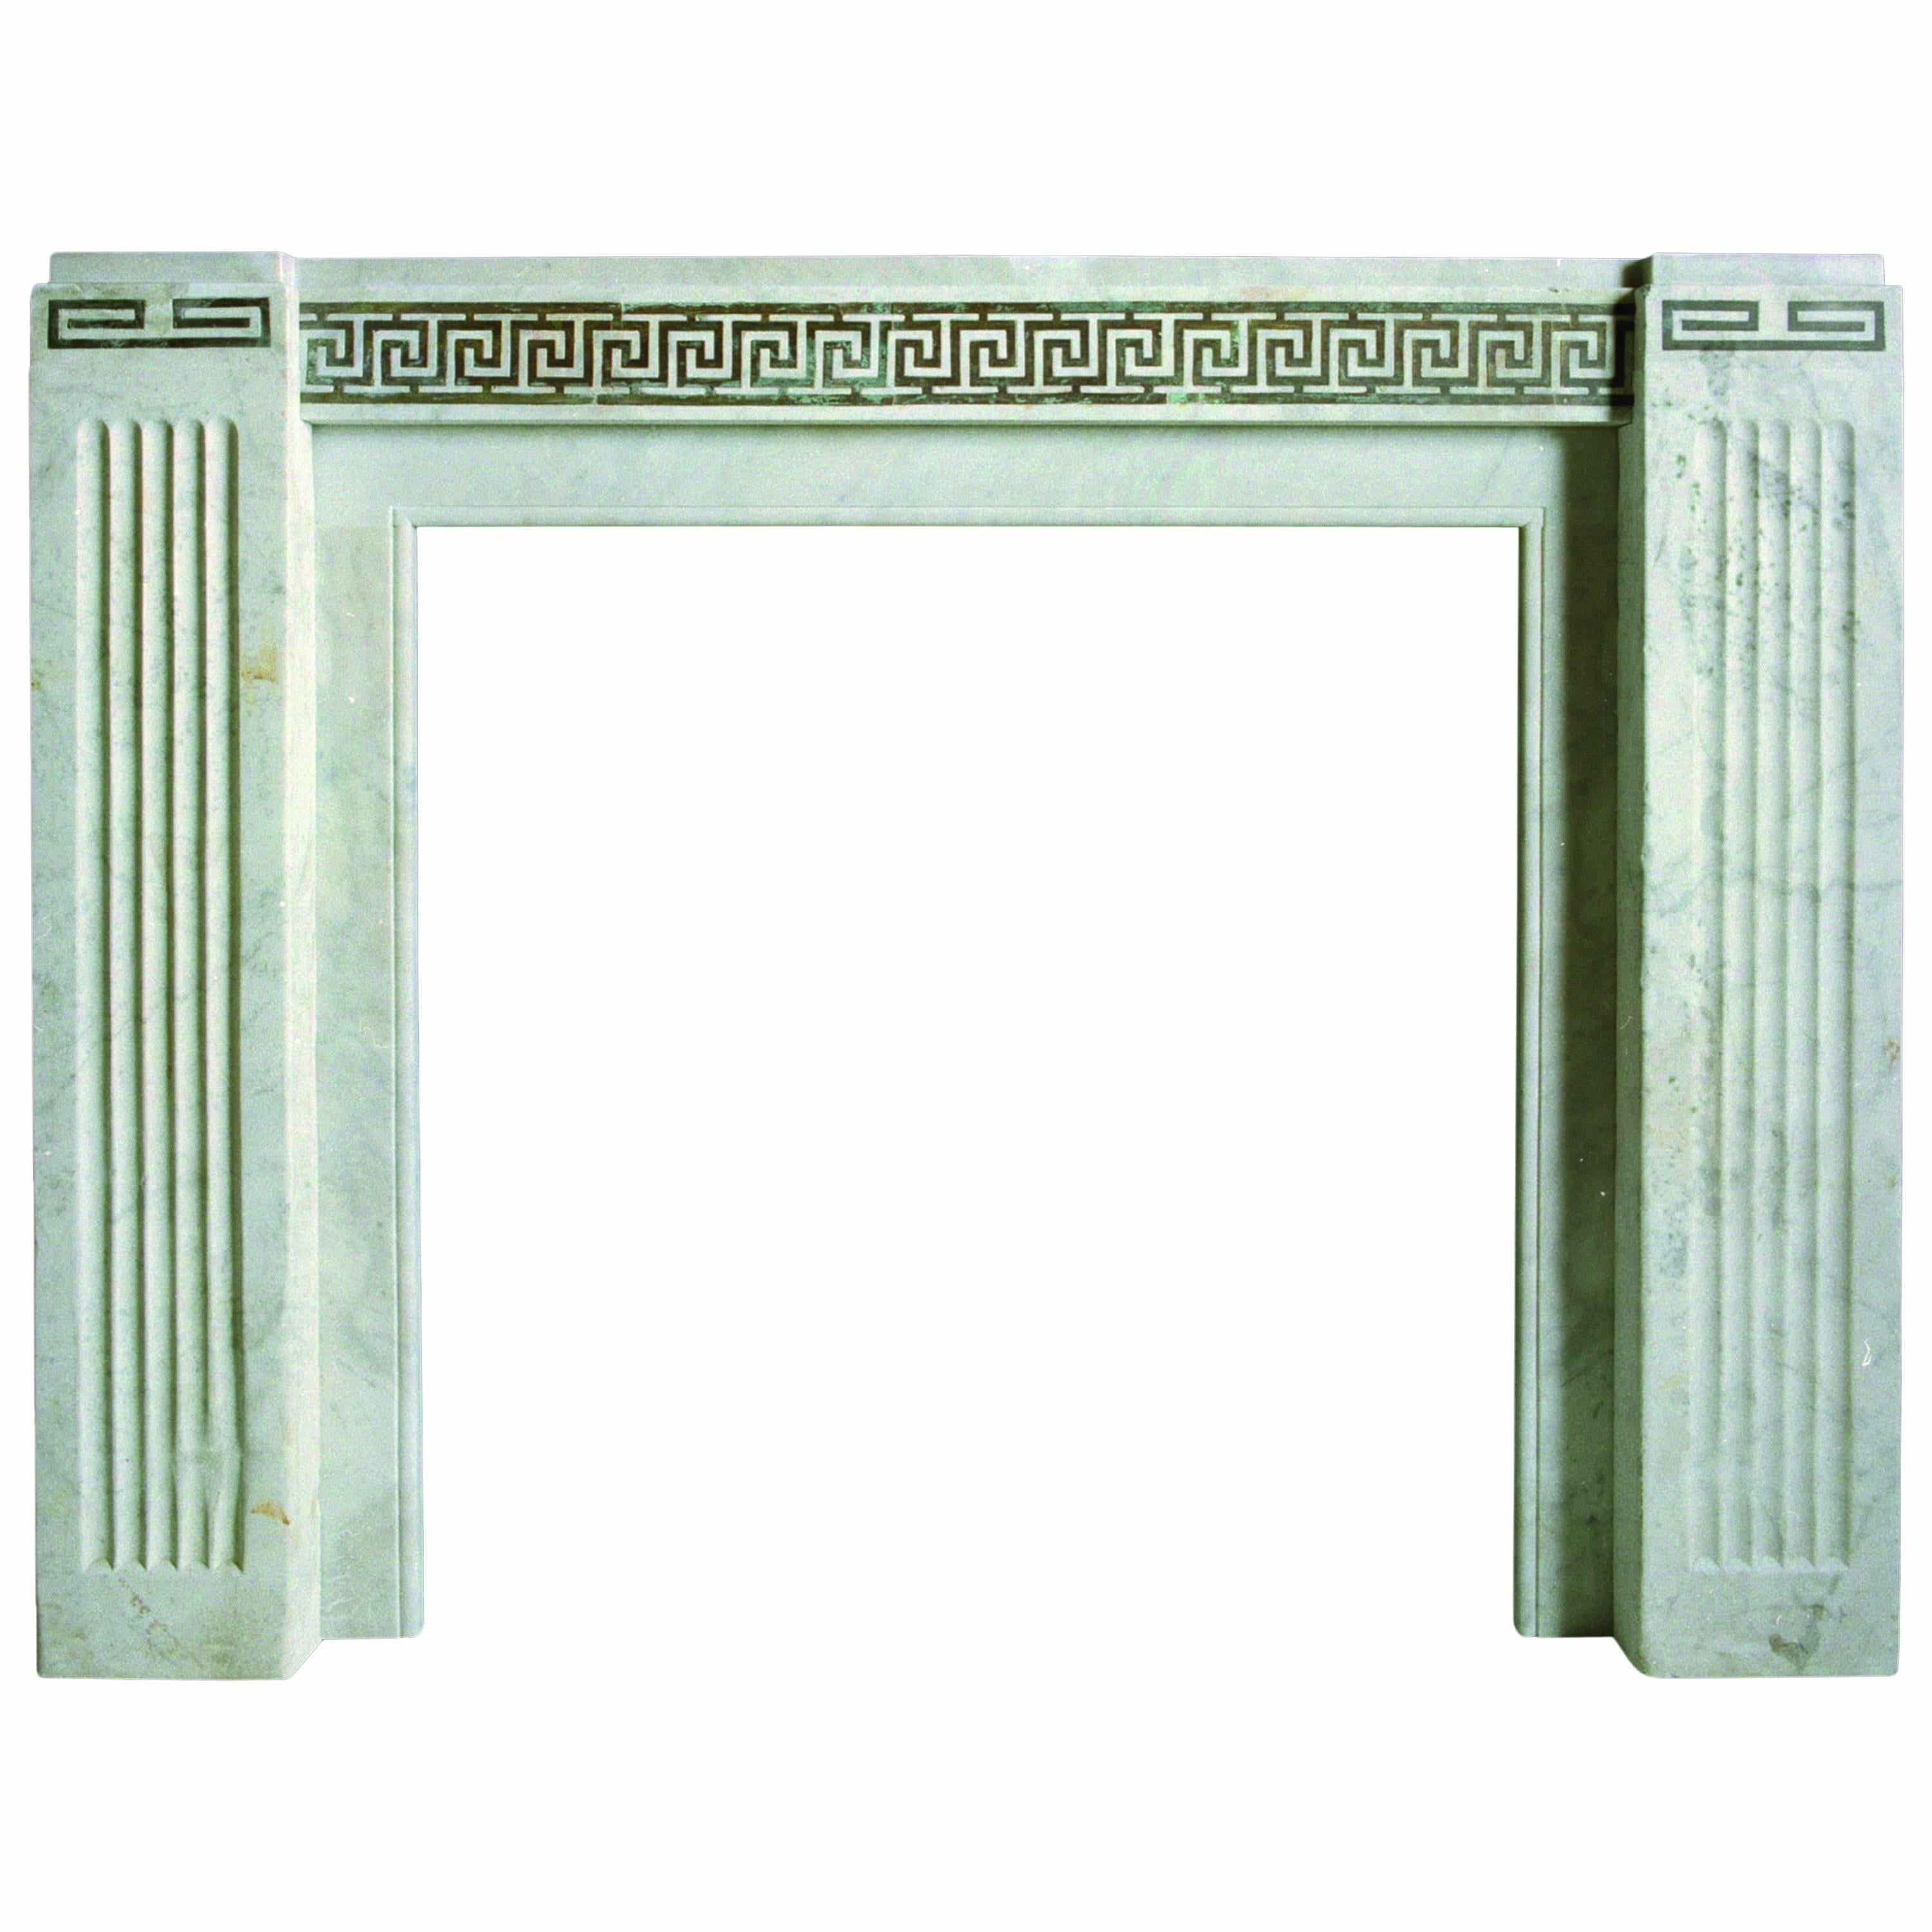 18th Century Neoclassical Reproduction Chimneypiece Attributed to Sir John Soane